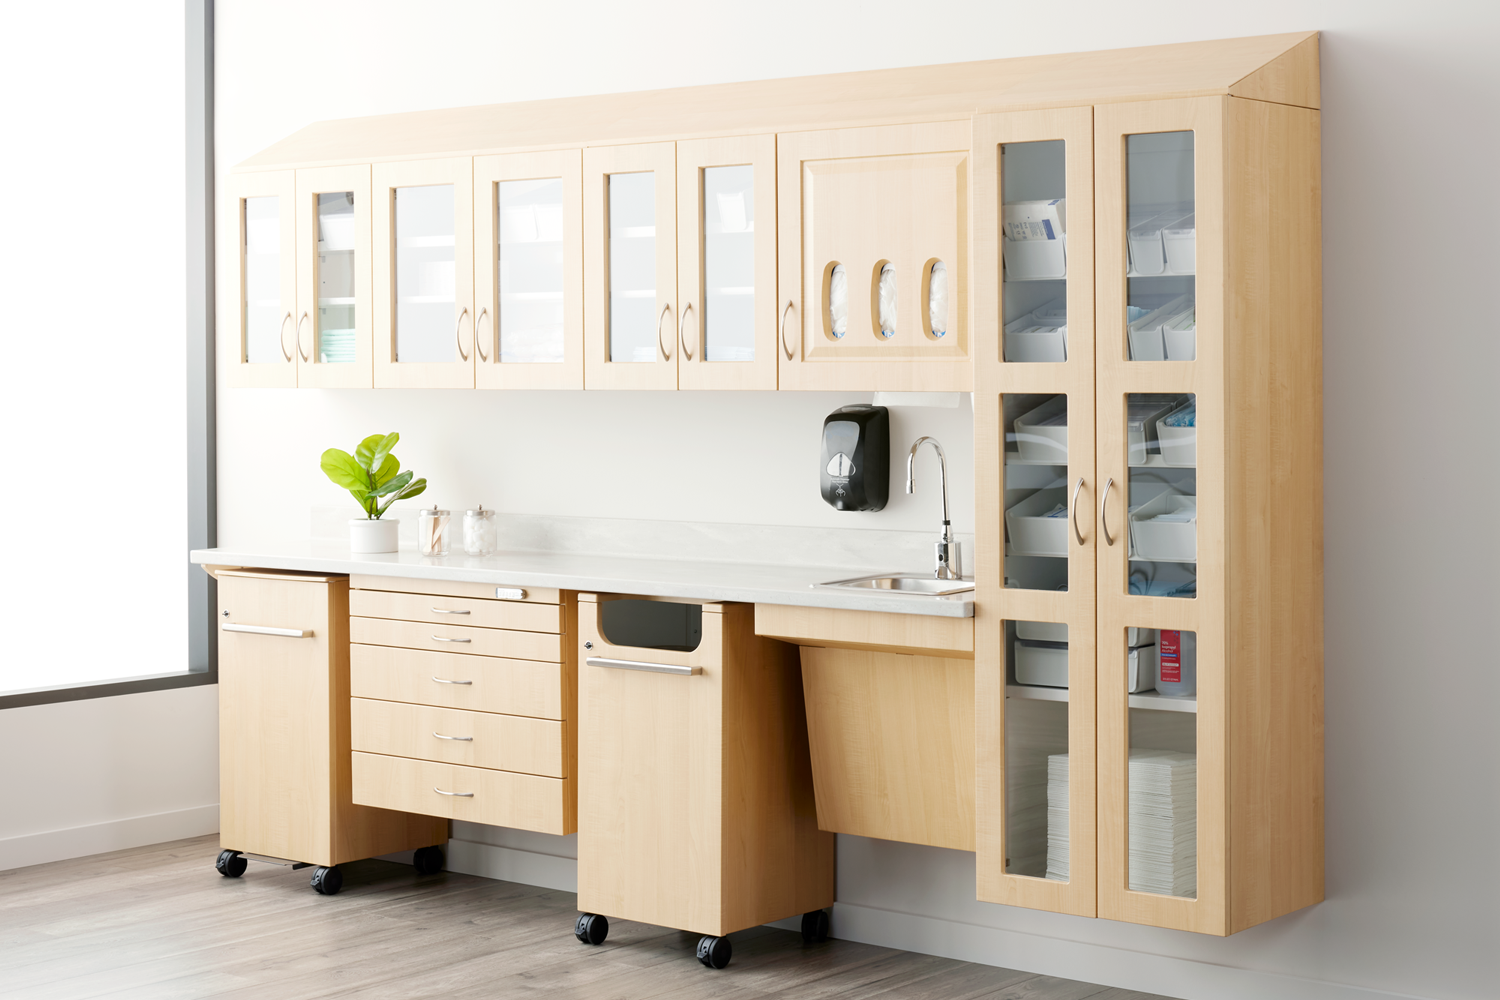 Synthesis Wall-Hung Cabinetry